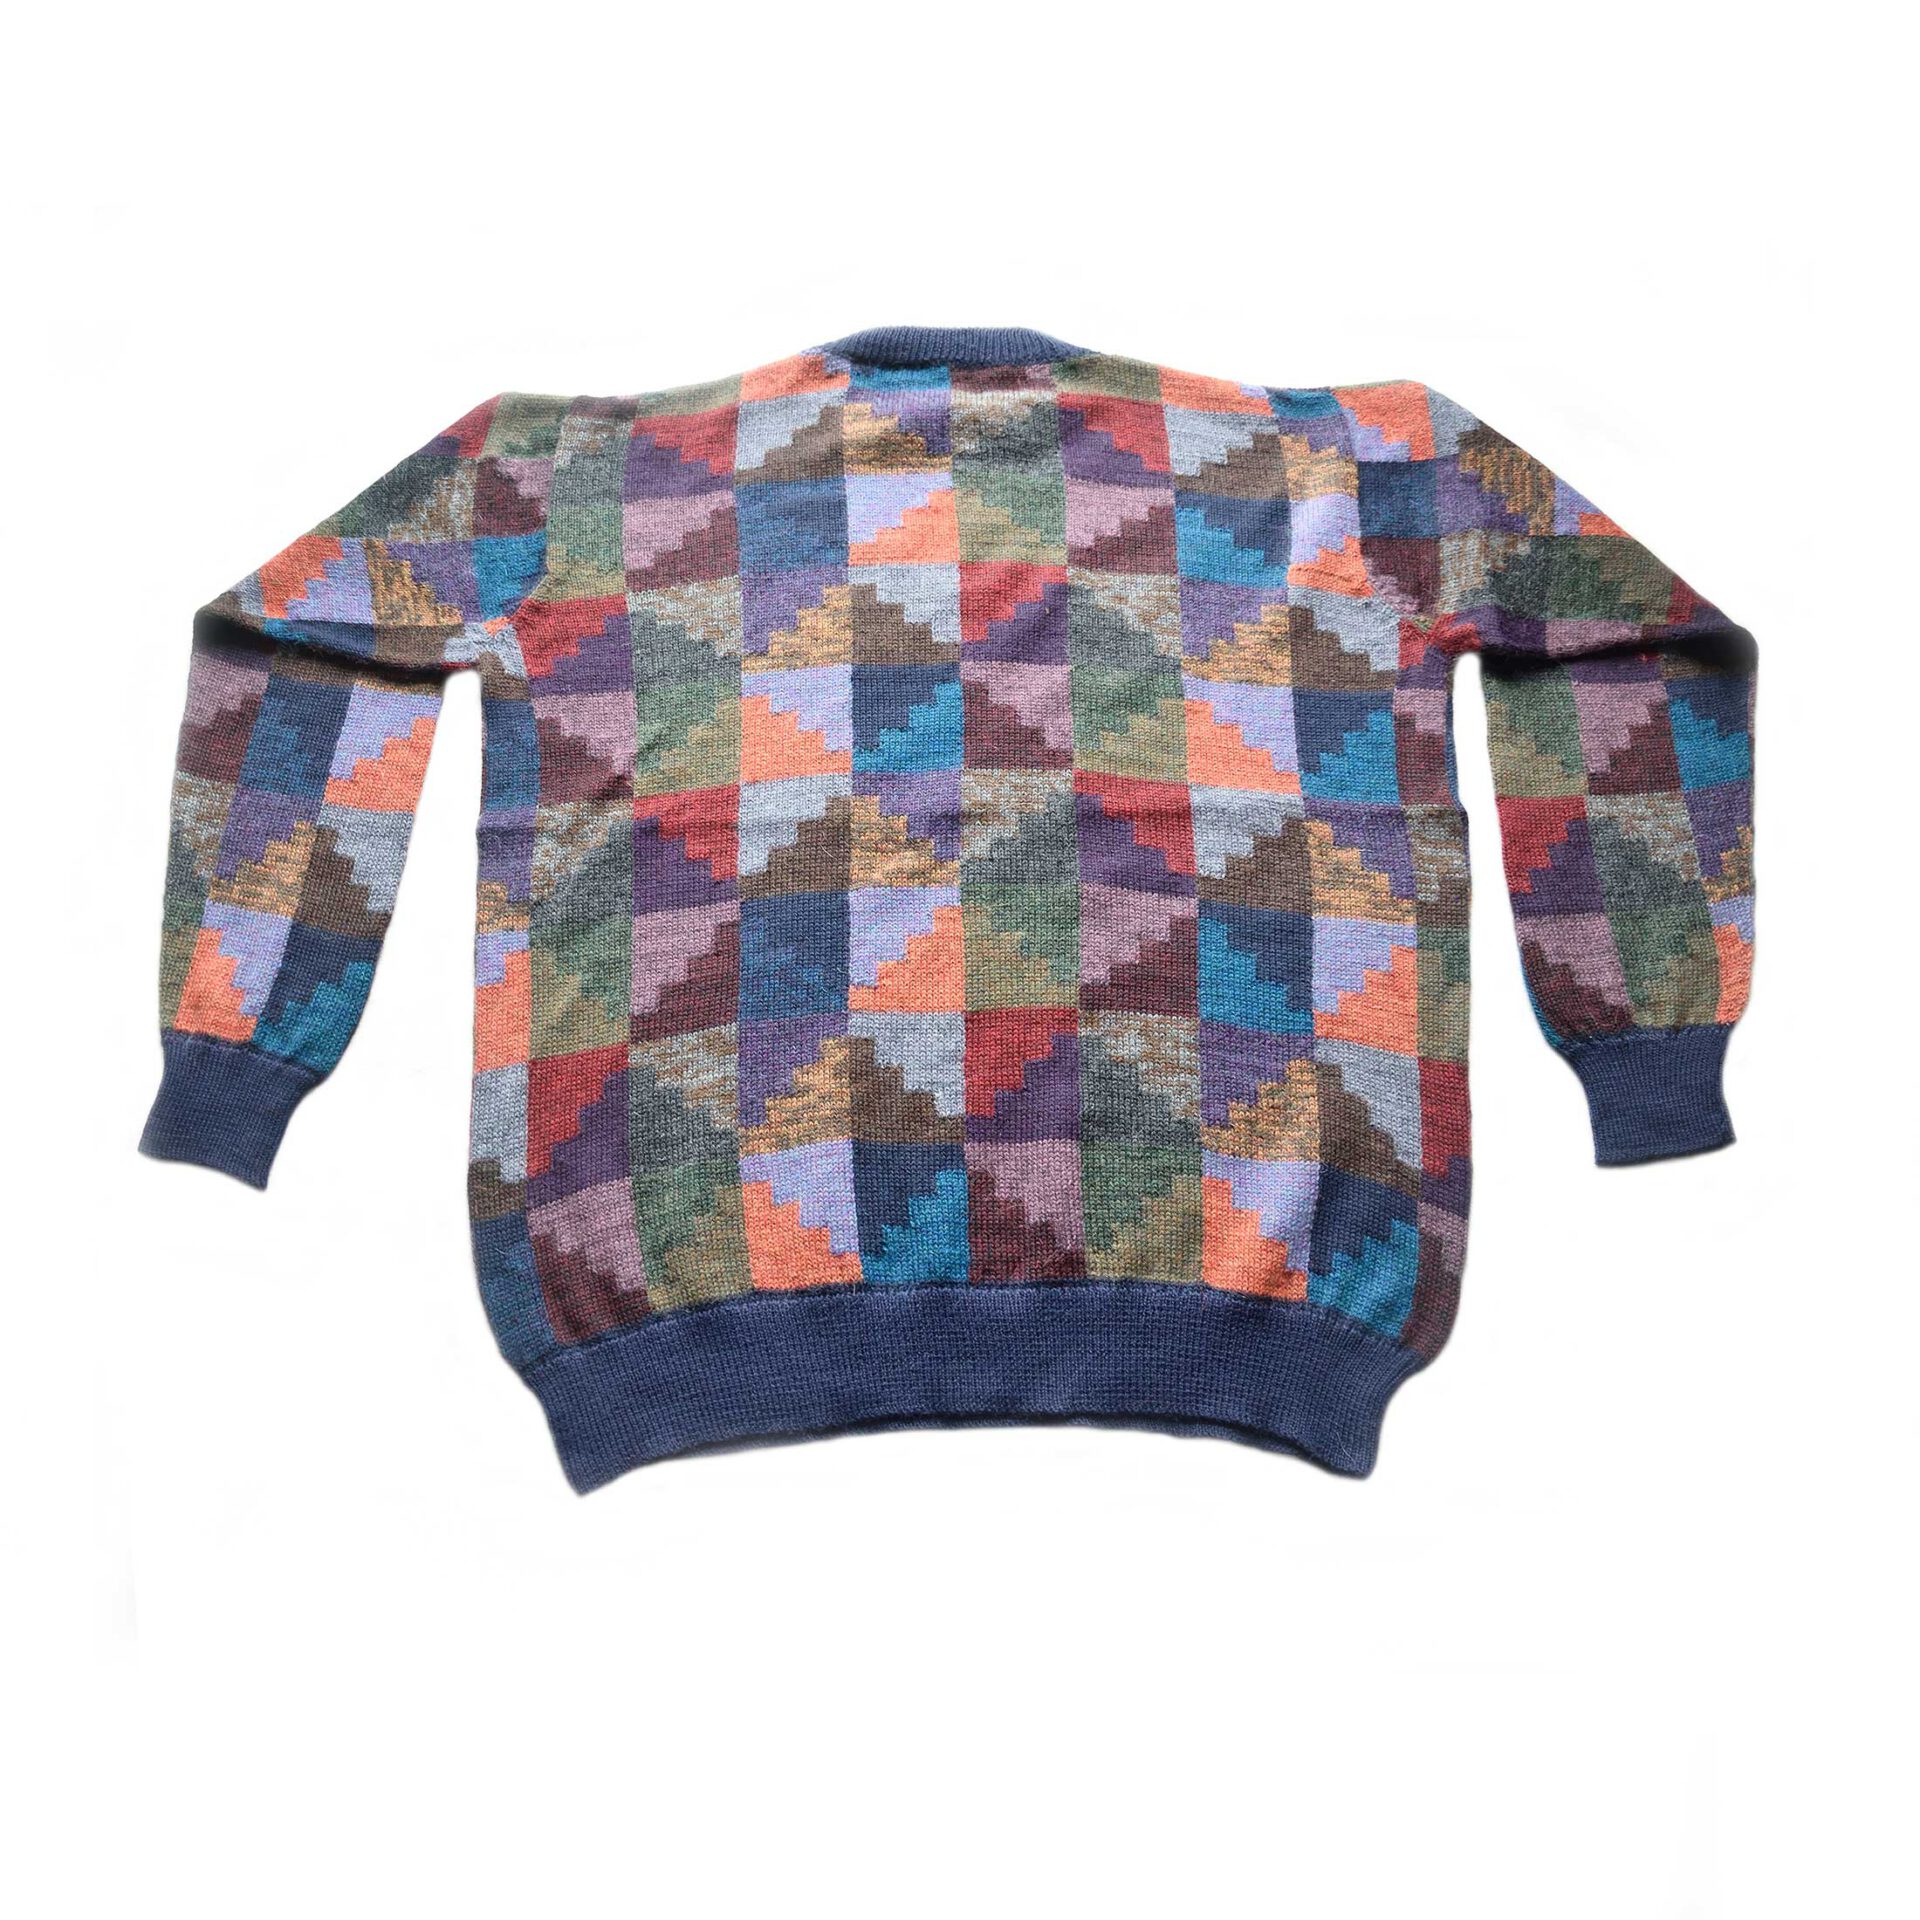 PopsFL Knitwear wholesale Men sweater with all over colorful graphic pattern, crew neck 100% alpaca. 